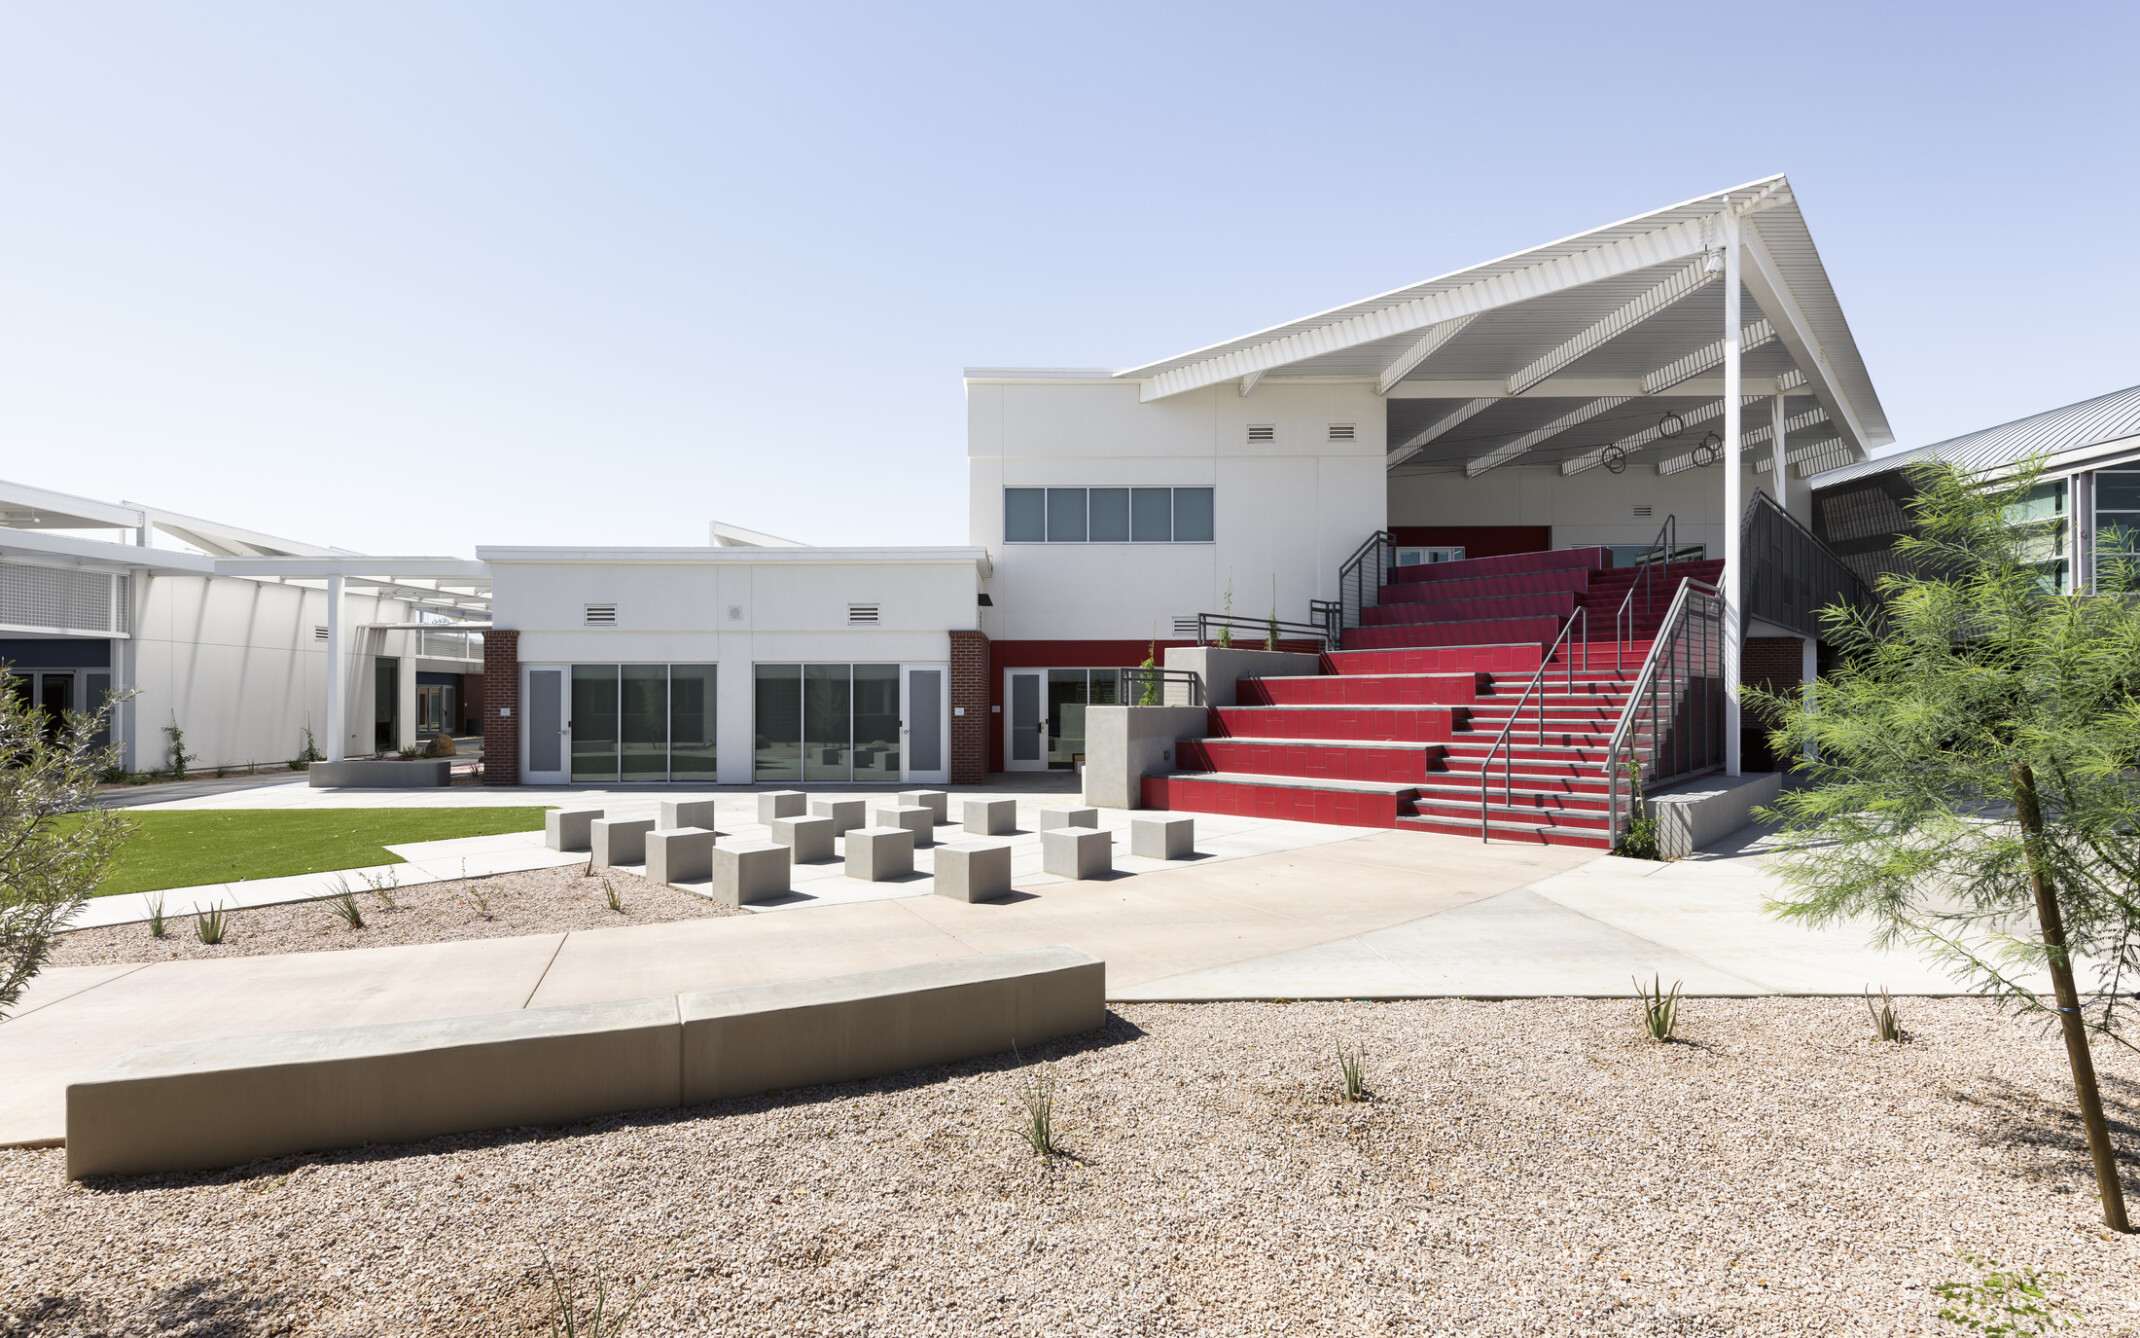 exterior of the quad and connected buildings, split section red stairs with steps and seating, white building with angular steel roof, concrete pathways, pea gravel landscaping, trees, grass